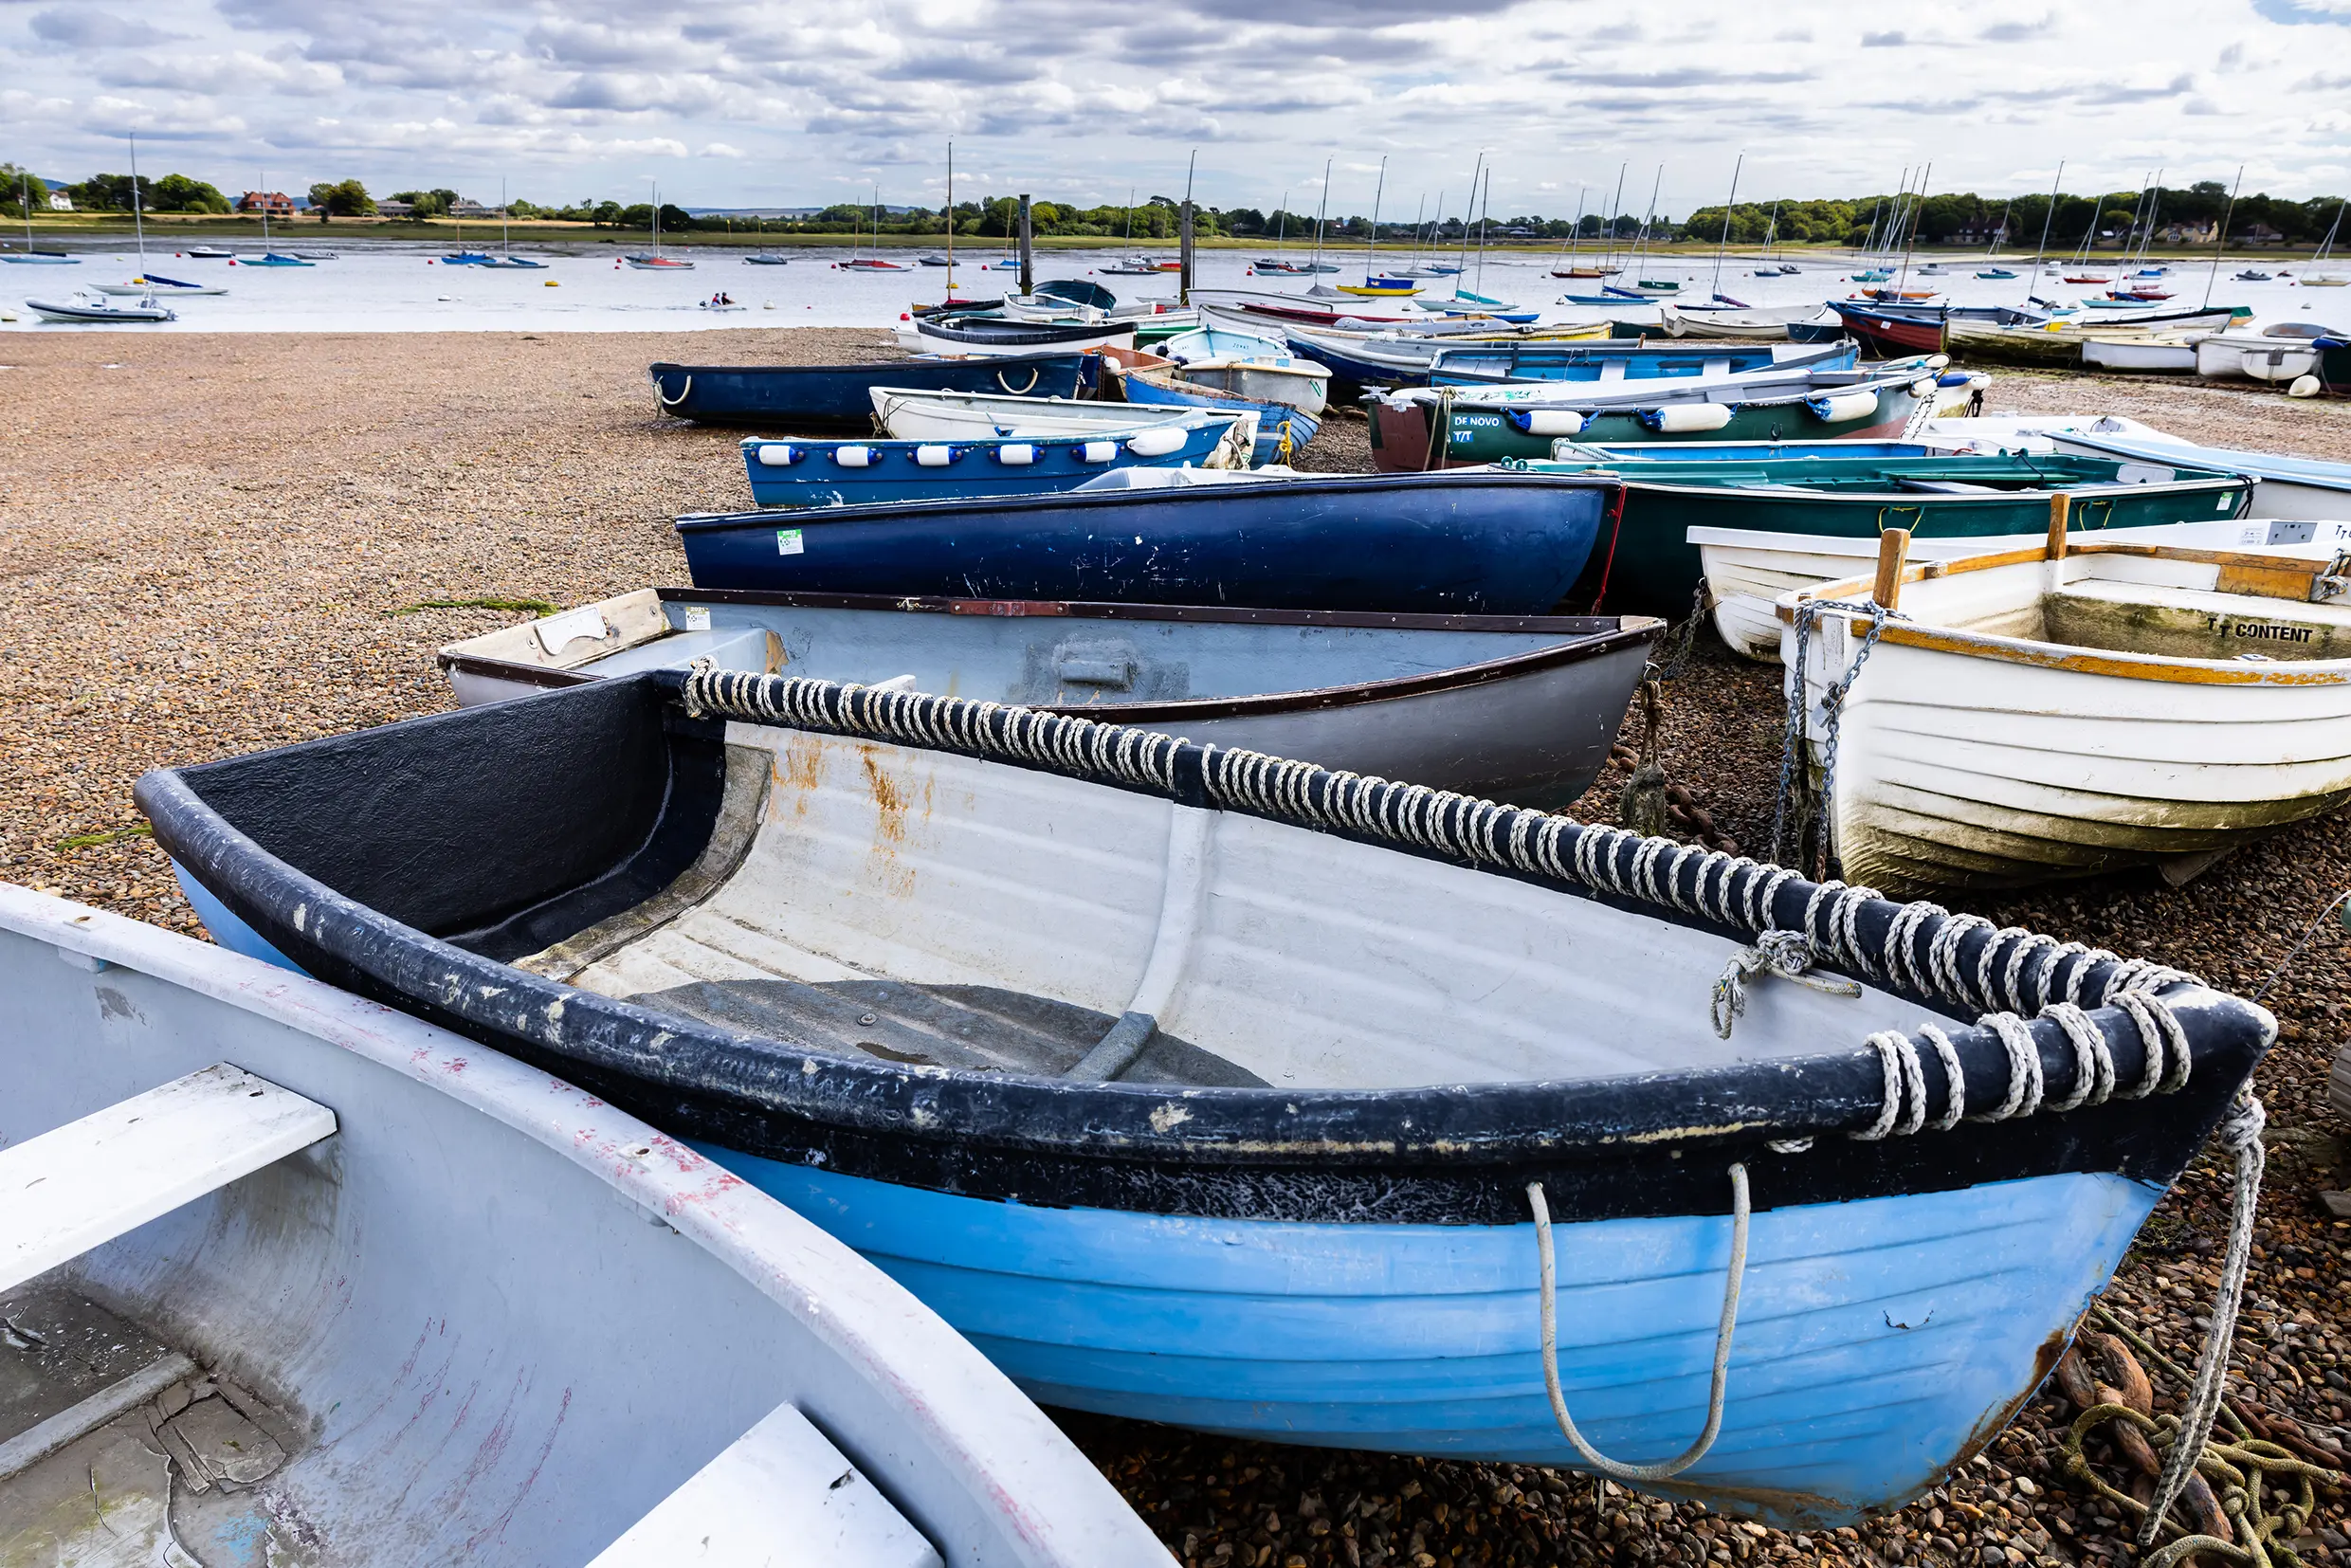 Boats lined up at Chichester Harbour